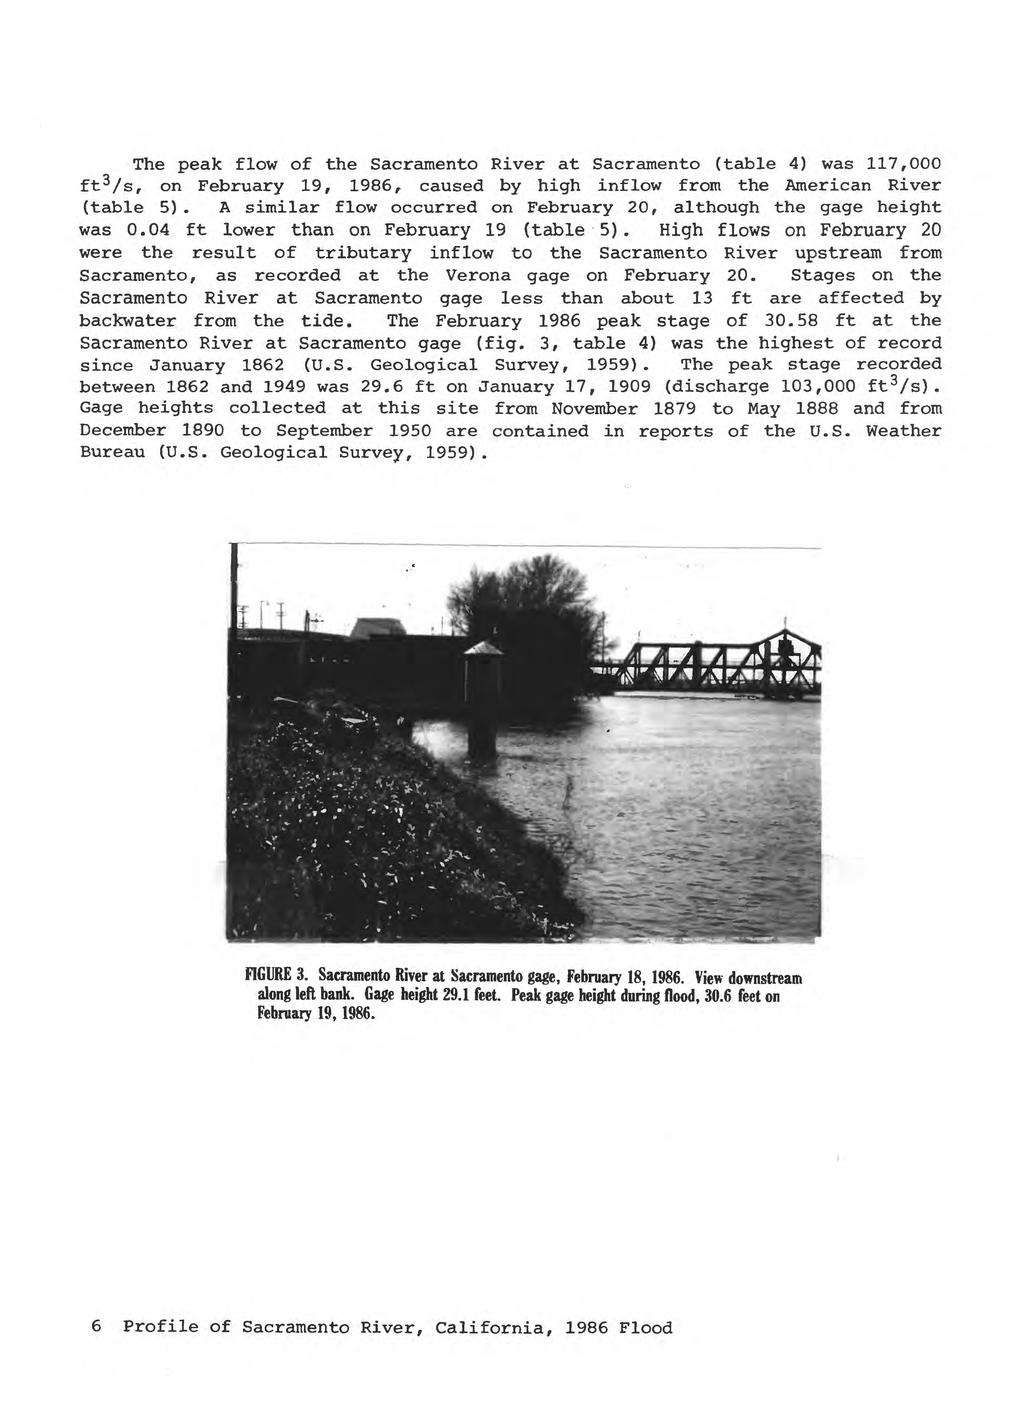 The peak flow of the Sacramento River at Sacramento (table 4) was 117 ft 3 /s f on February 19, 1986 1 caused by high inflow from the American River (table 5).